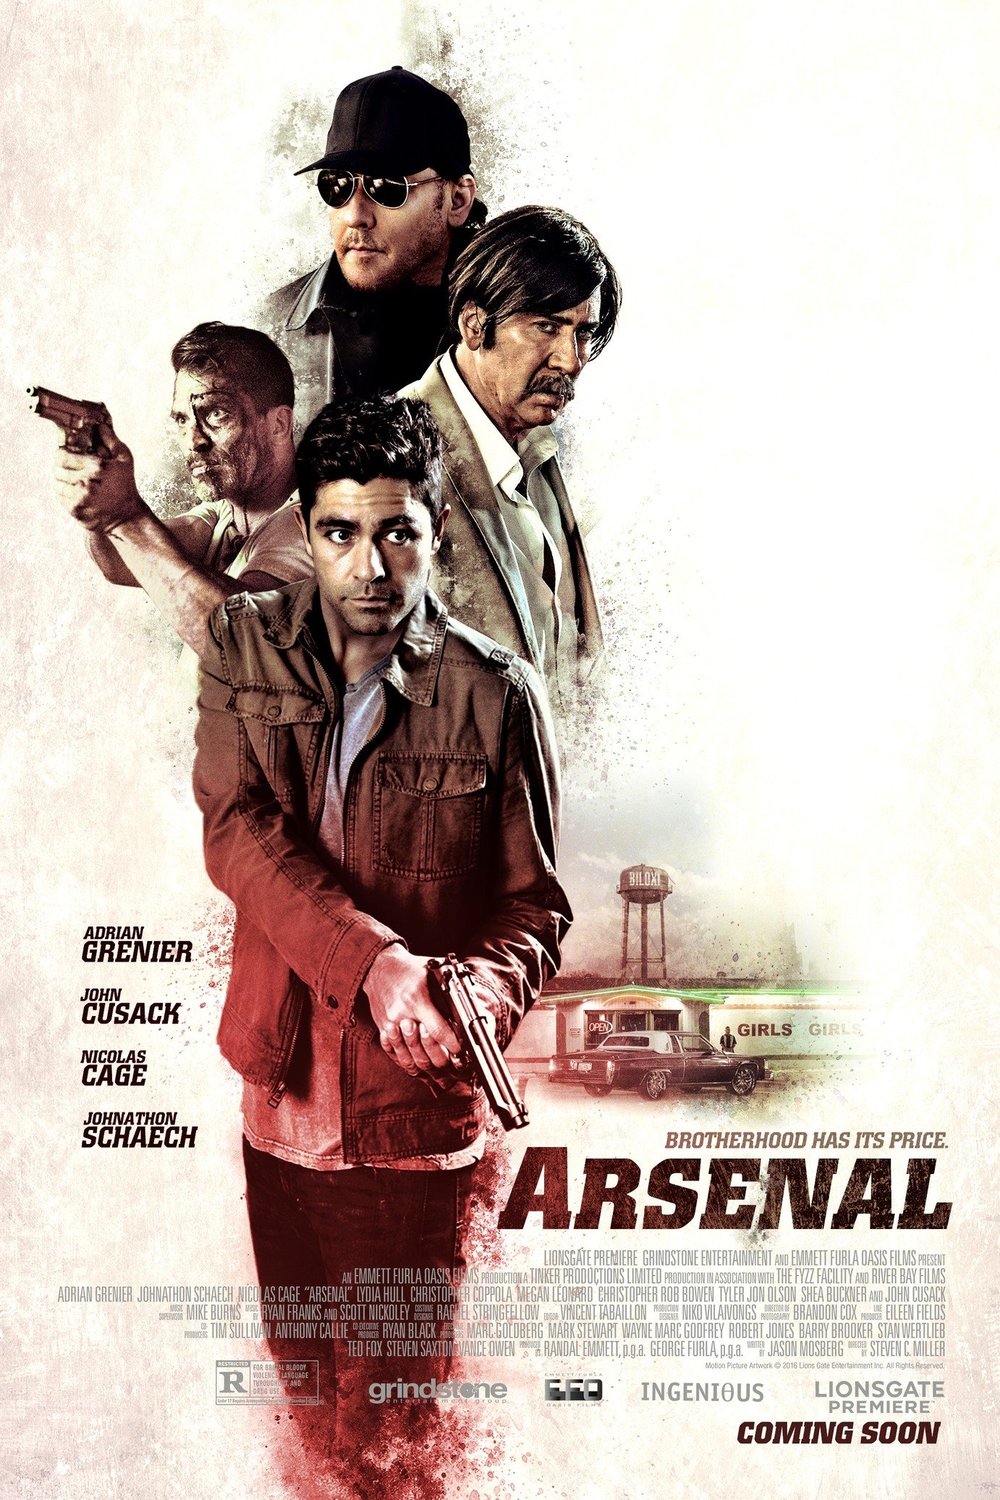 Poster of the movie Arsenal